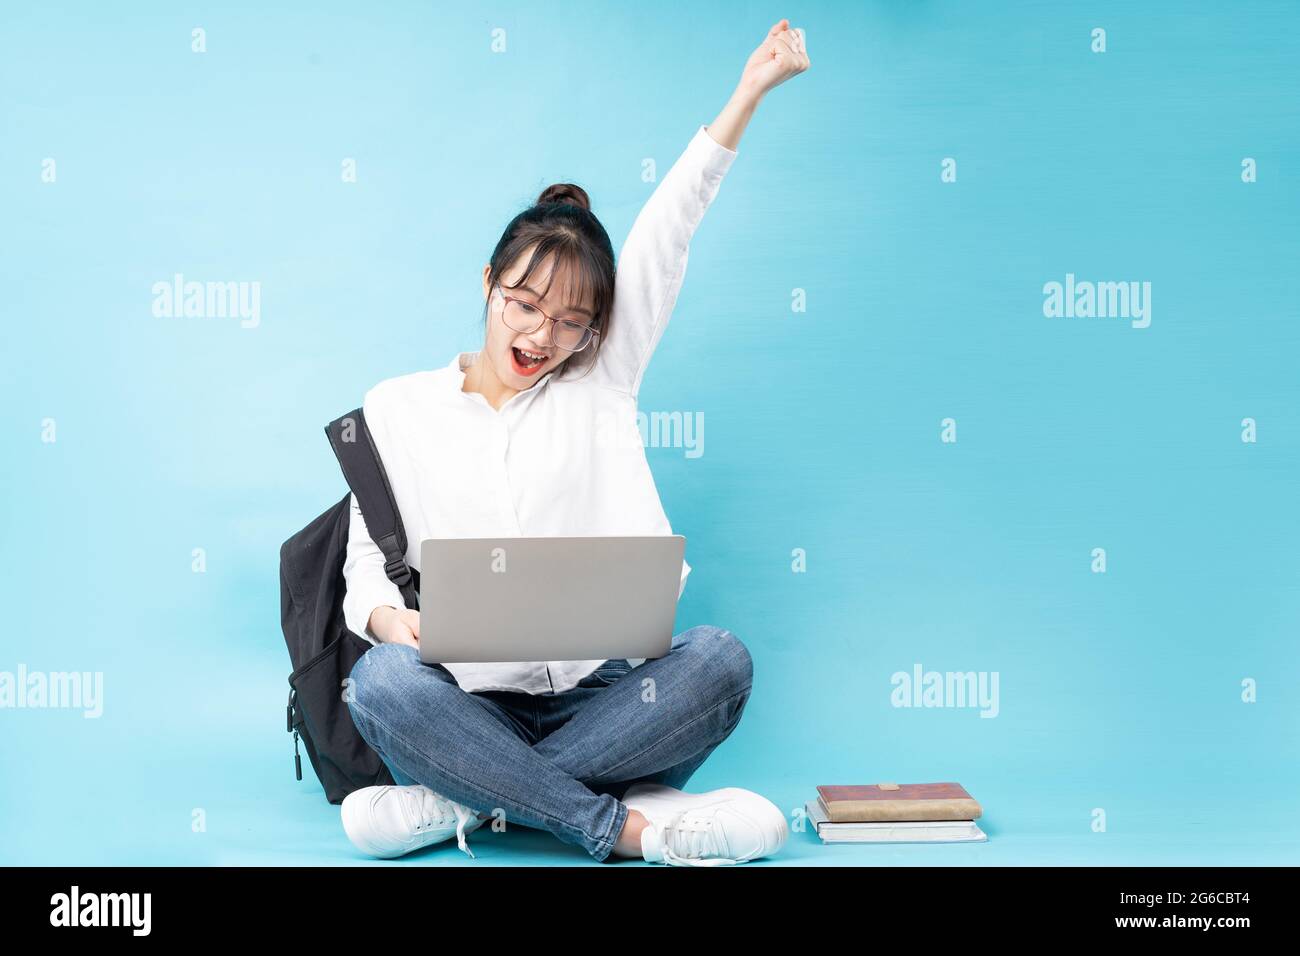 Portrait of a happy young woman sitting on a blue background Stock Photo